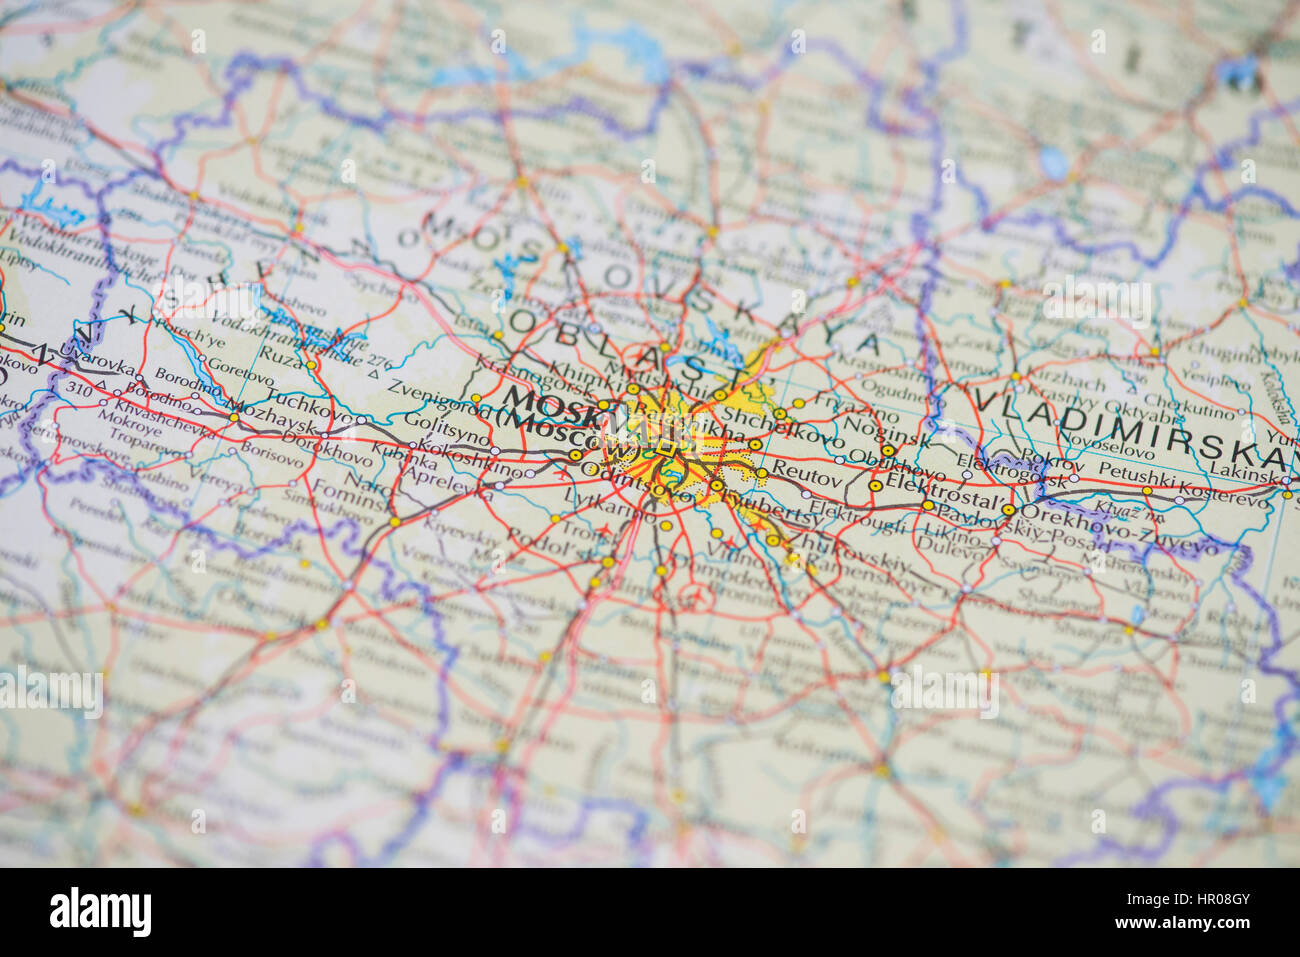 Russia map showing moscow Stock Photo